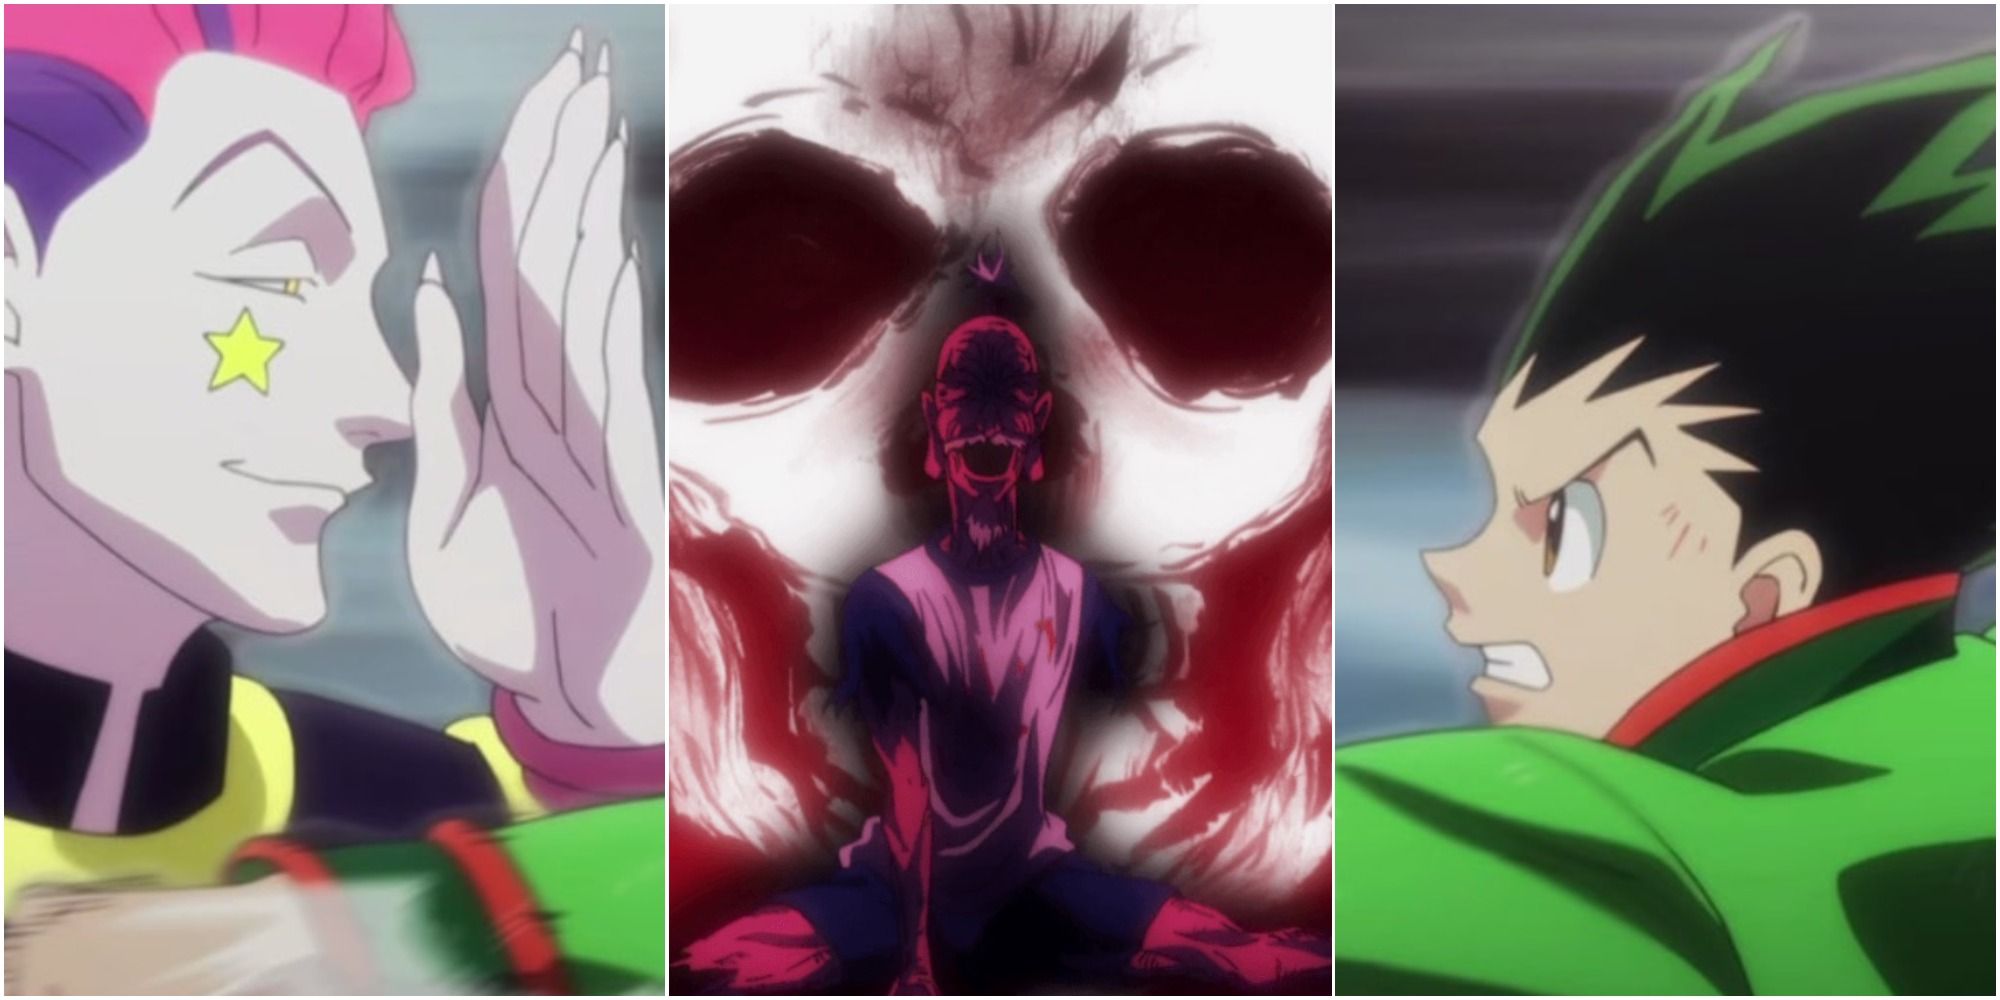 Hunter x Hunter After The Anime! Hisoka's Death and Gon Loses Everything! 